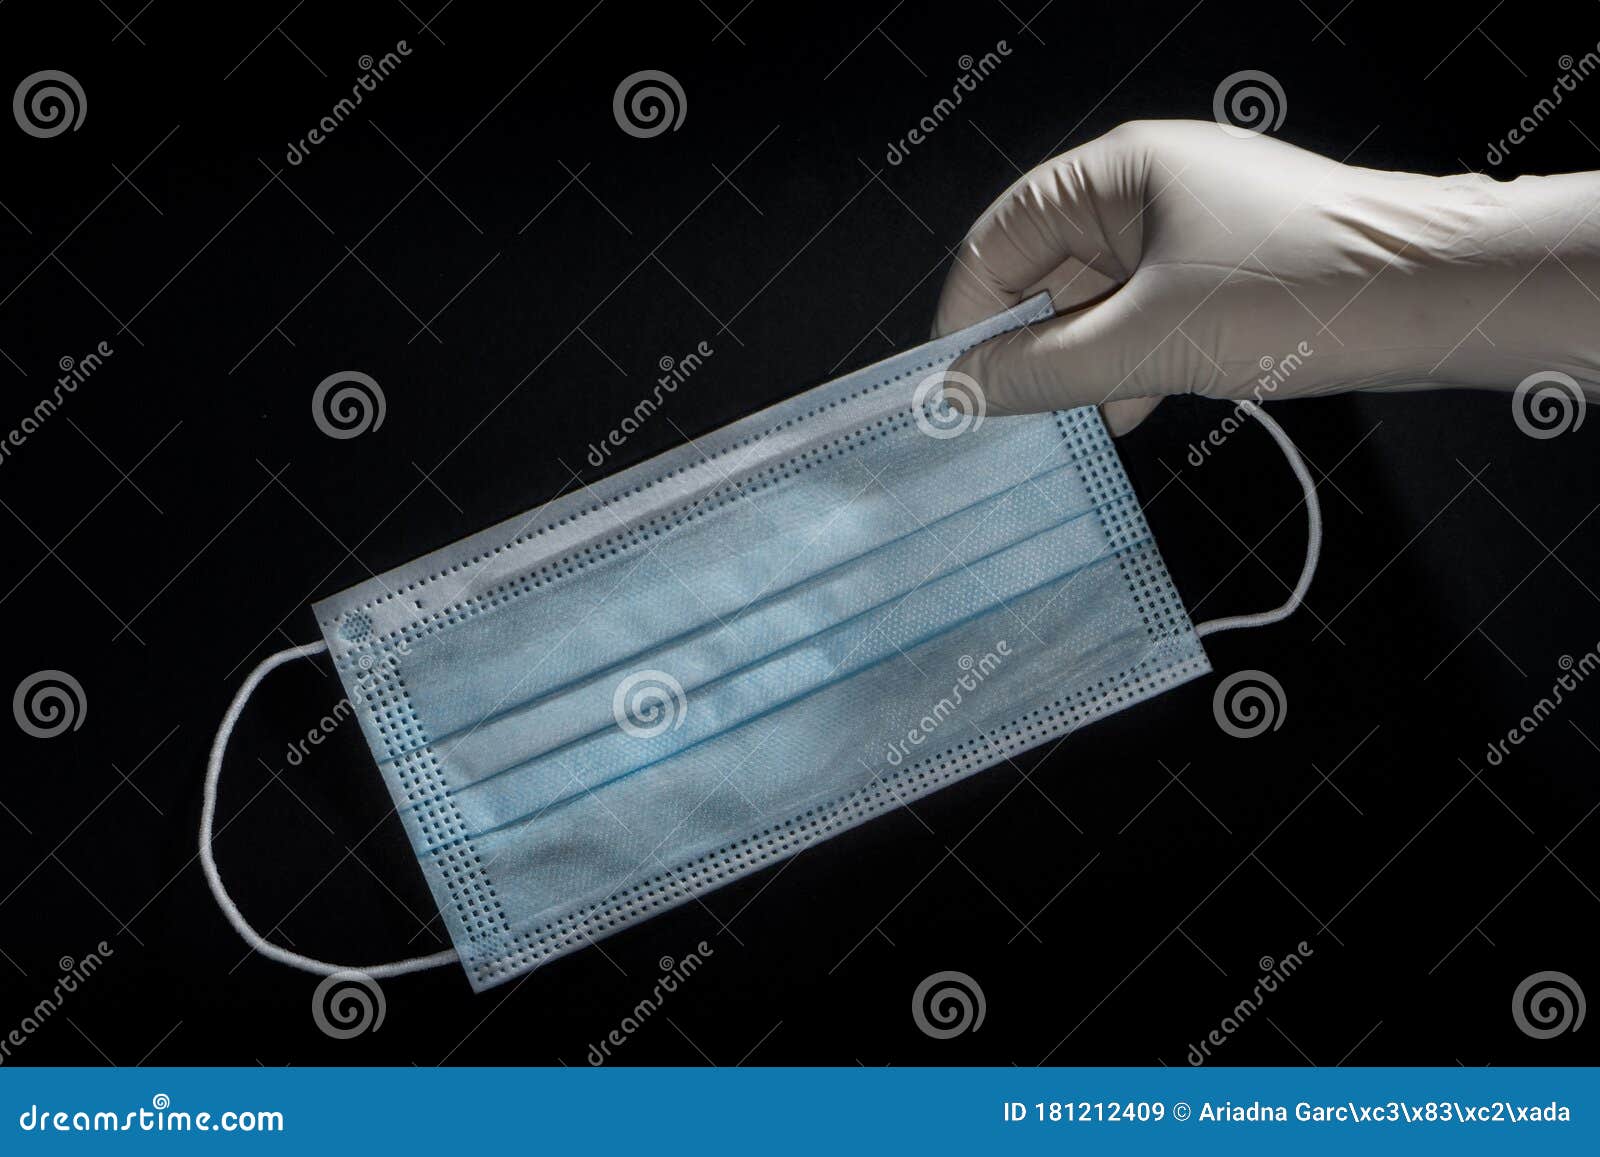 a hand with a latex glove picking up a face mask for virus protection on black background